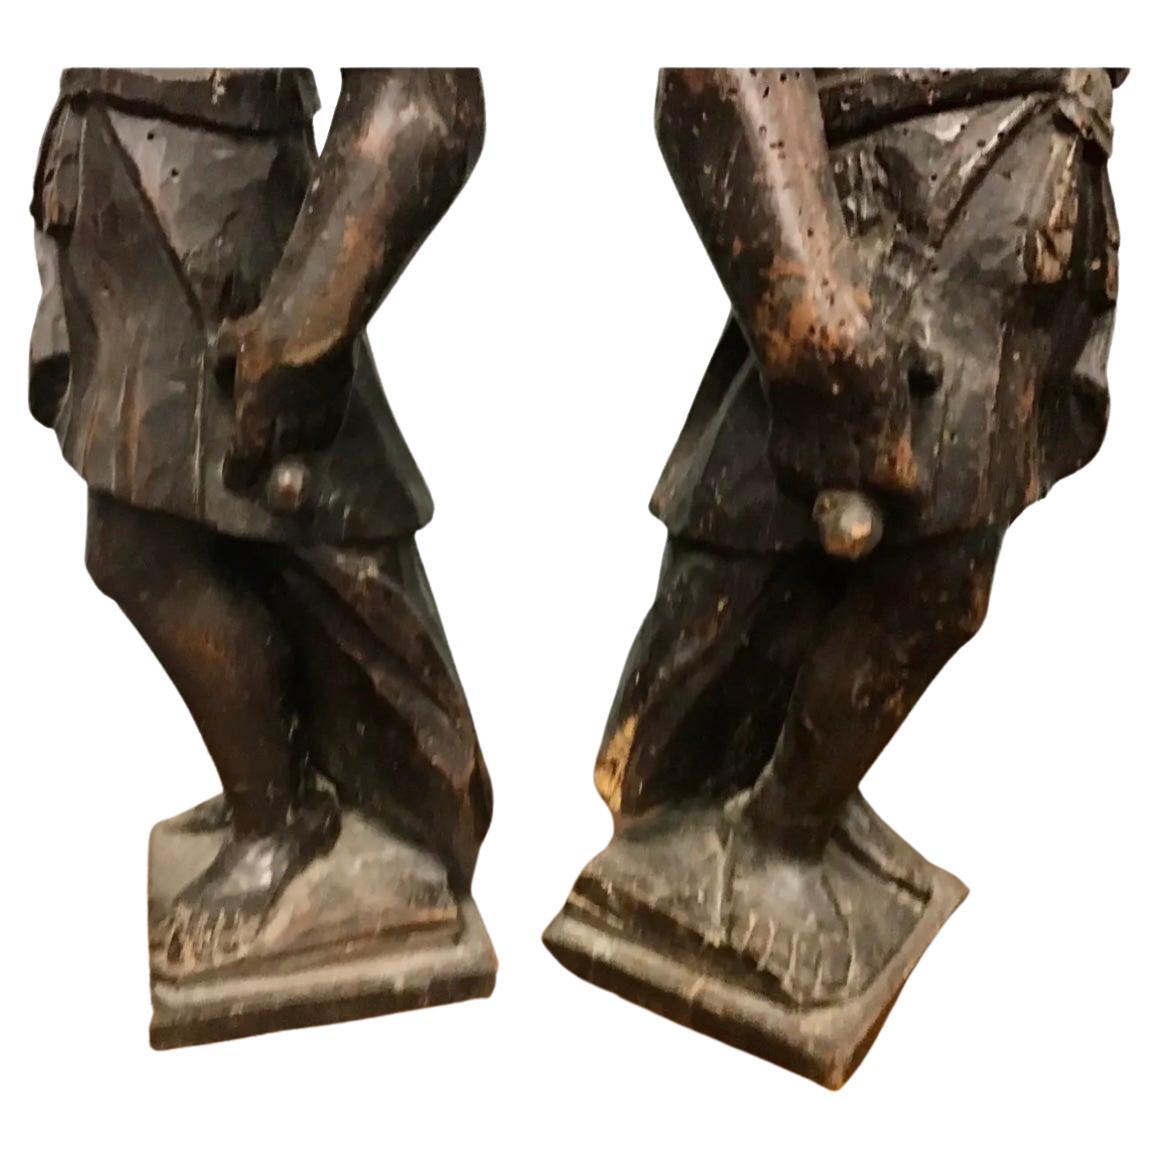 Beautiful pair of antique carved figurines. Italian, circa 1780, the tall sculptures depict two men, probably soldiers, in flowing robes with one arm out stretched. 
The elegant figures are in excellent condition commensurate with age and use, and